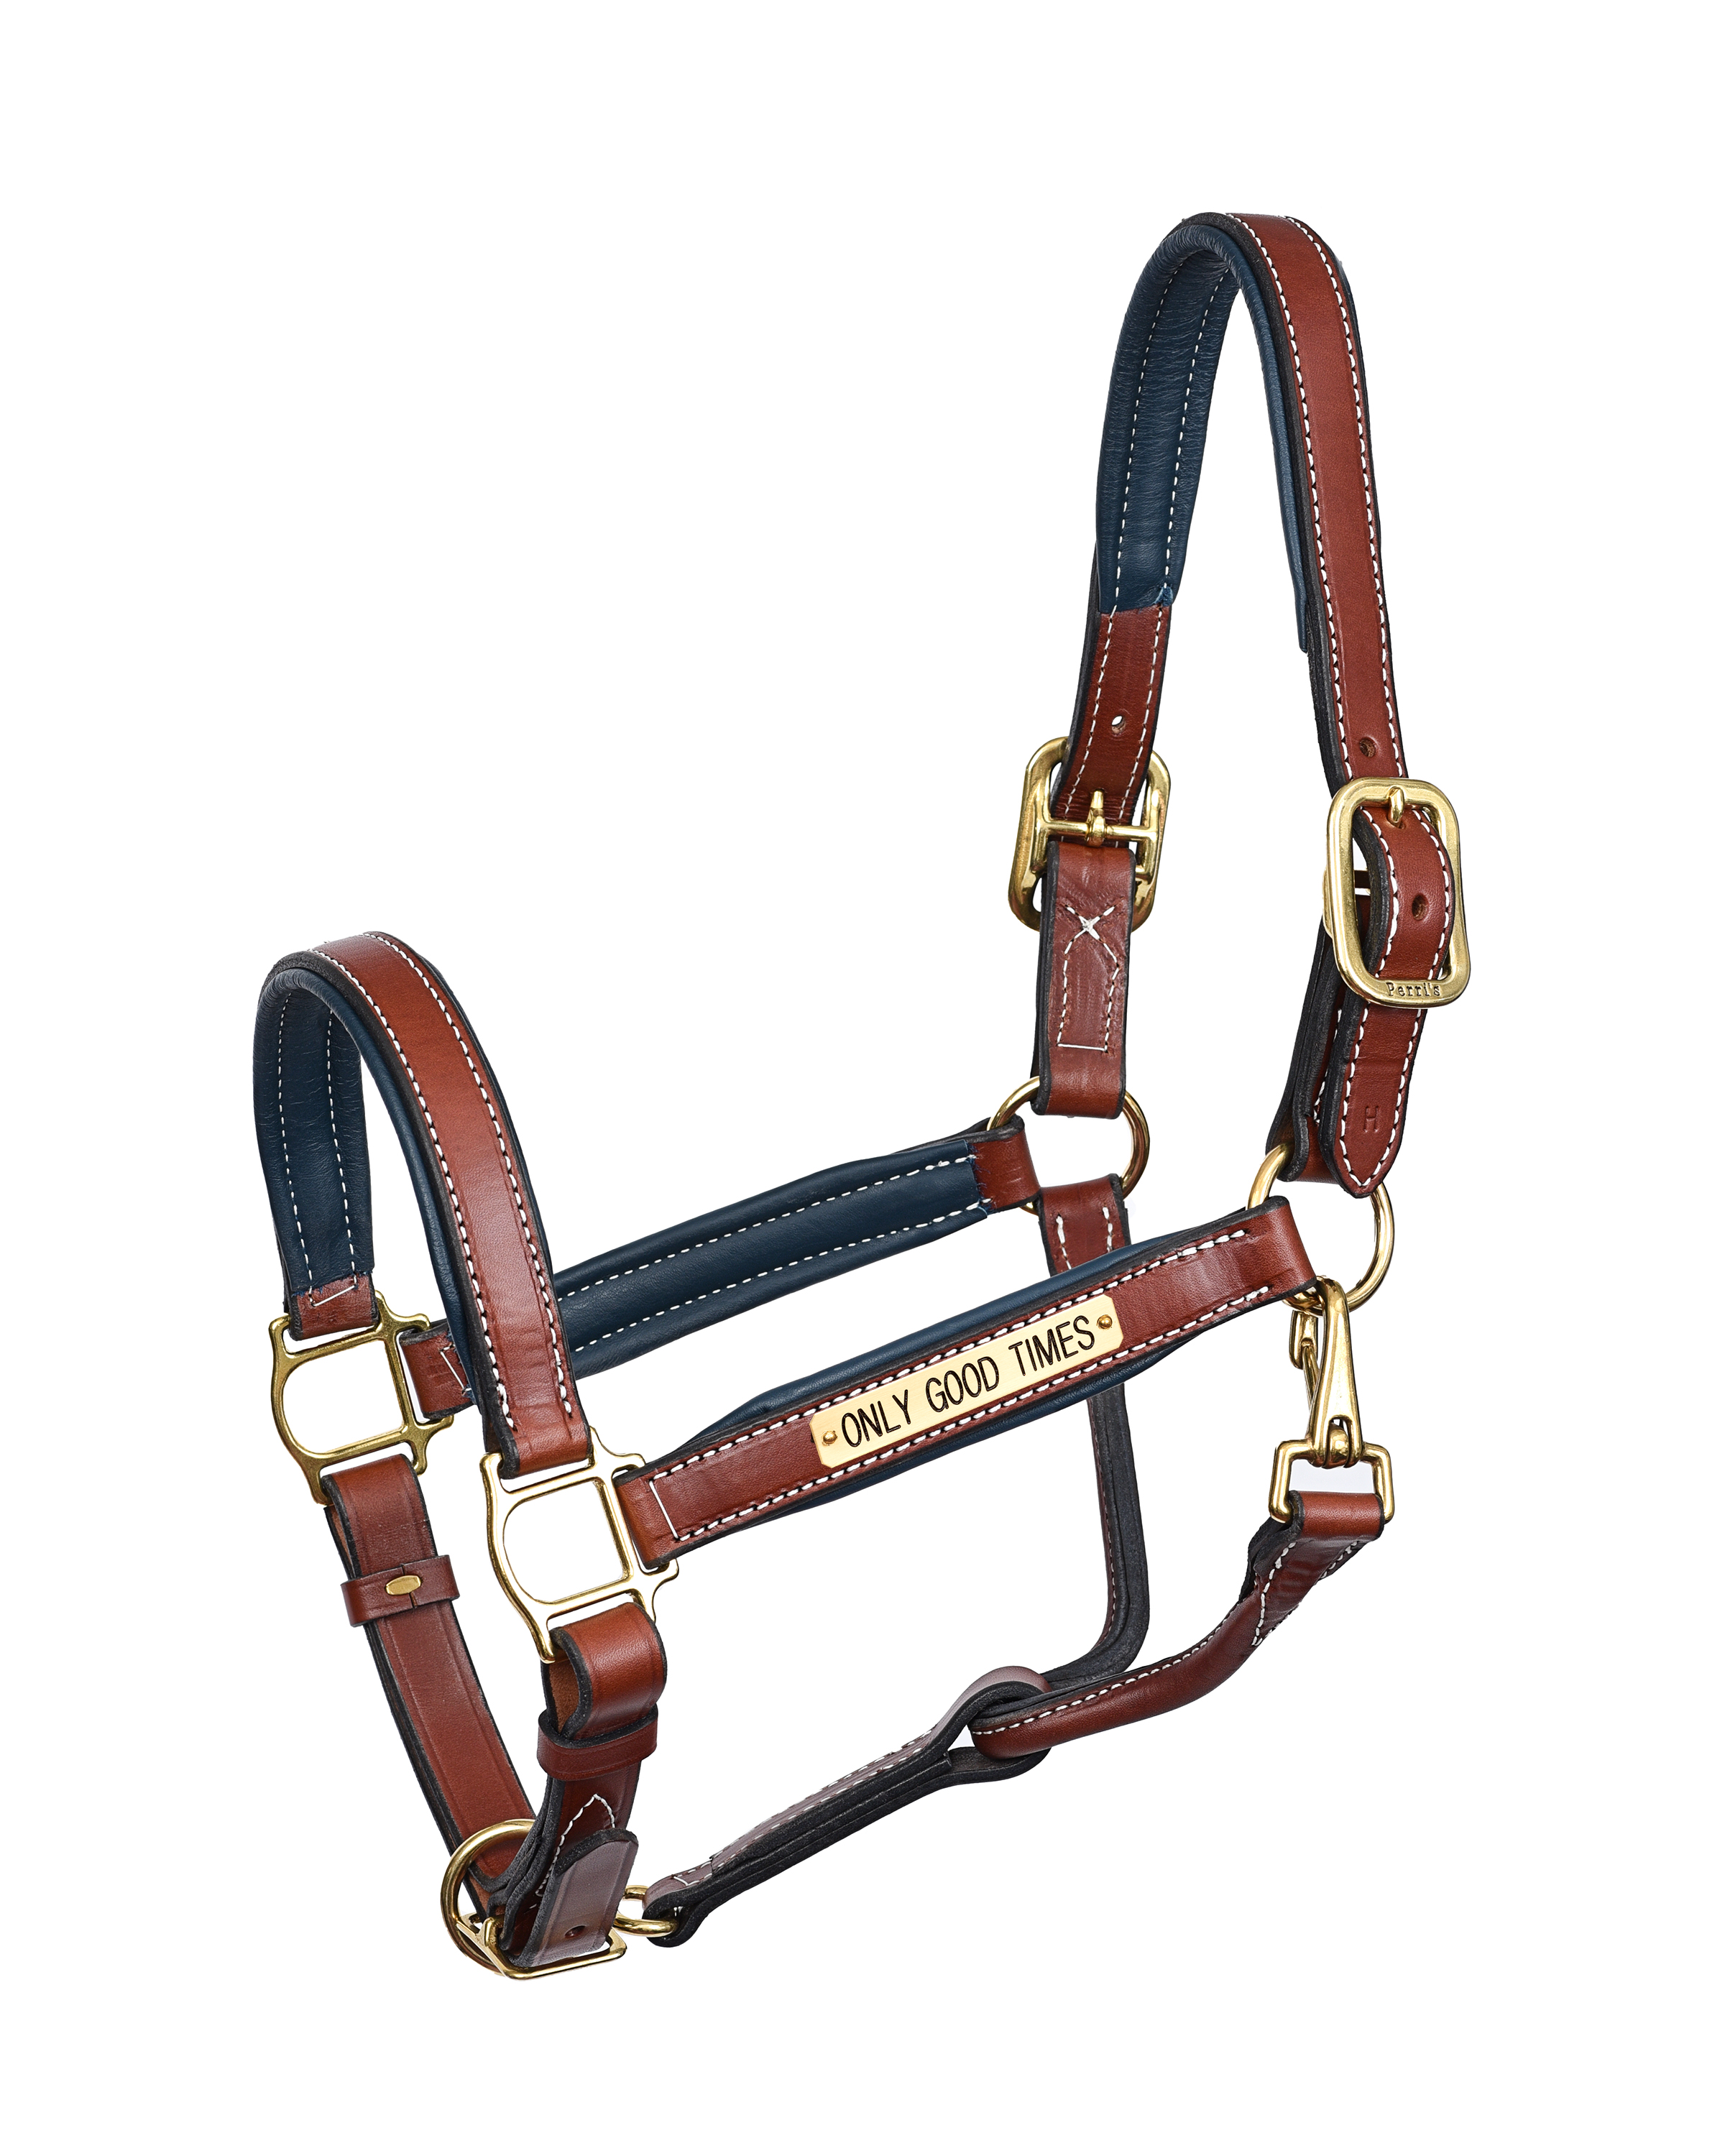 HRS CHEST / NAVY PAD LEATHER HALTER W / PLATE